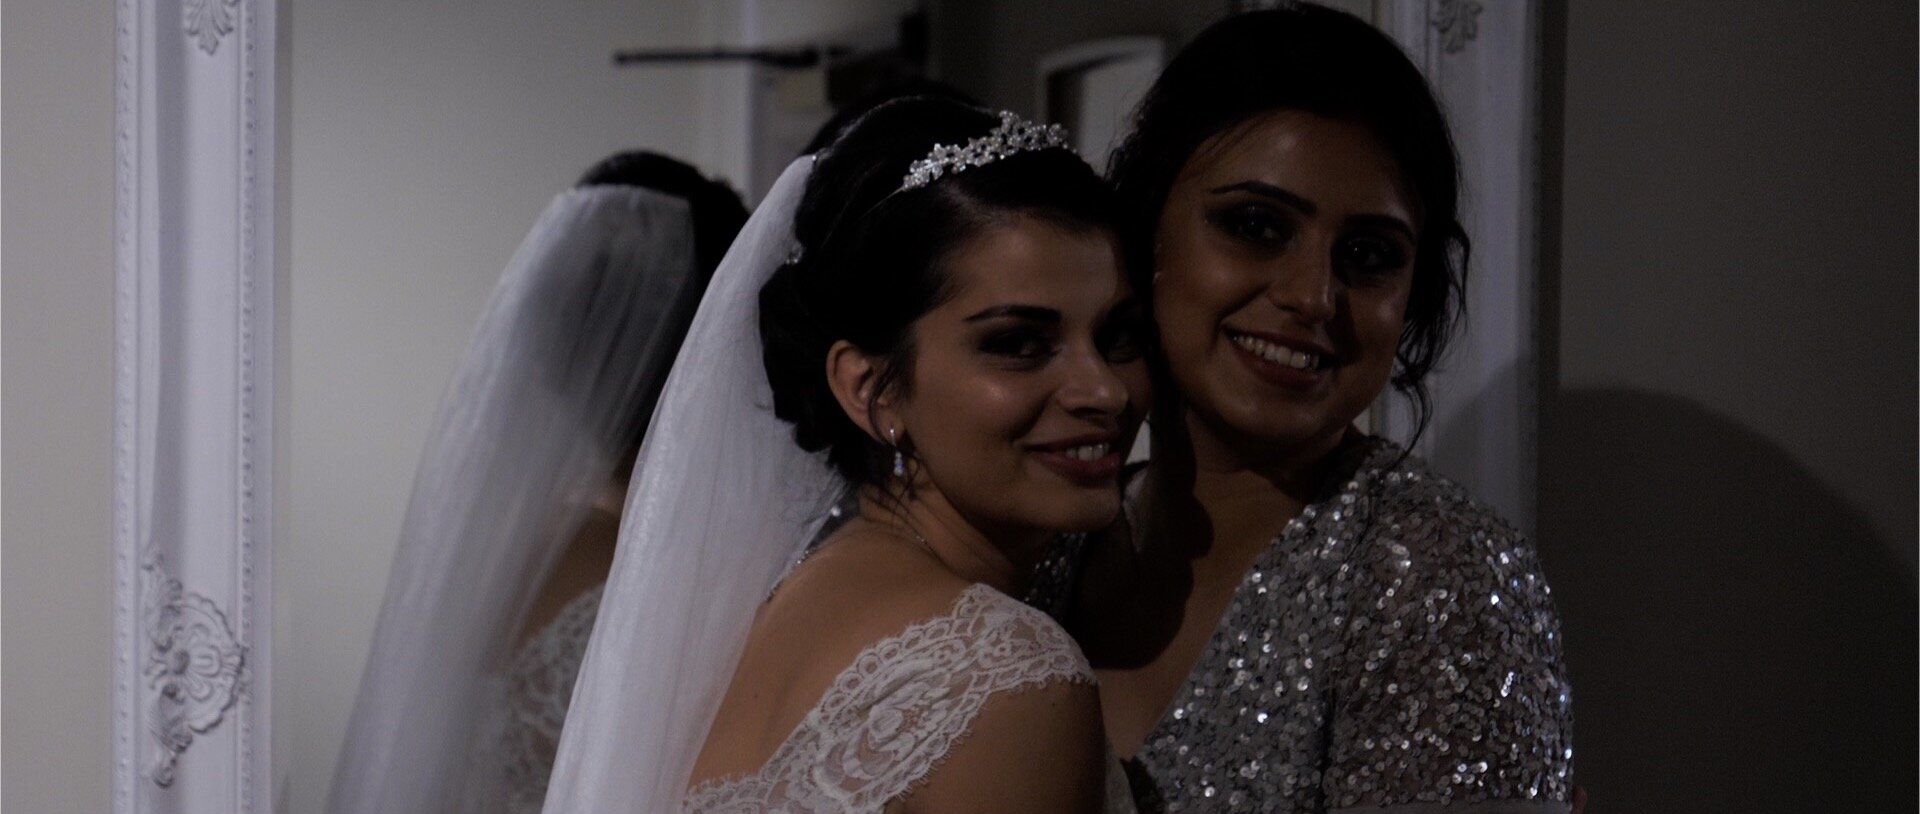 Bride and sister smile at Indian wedding.jpg